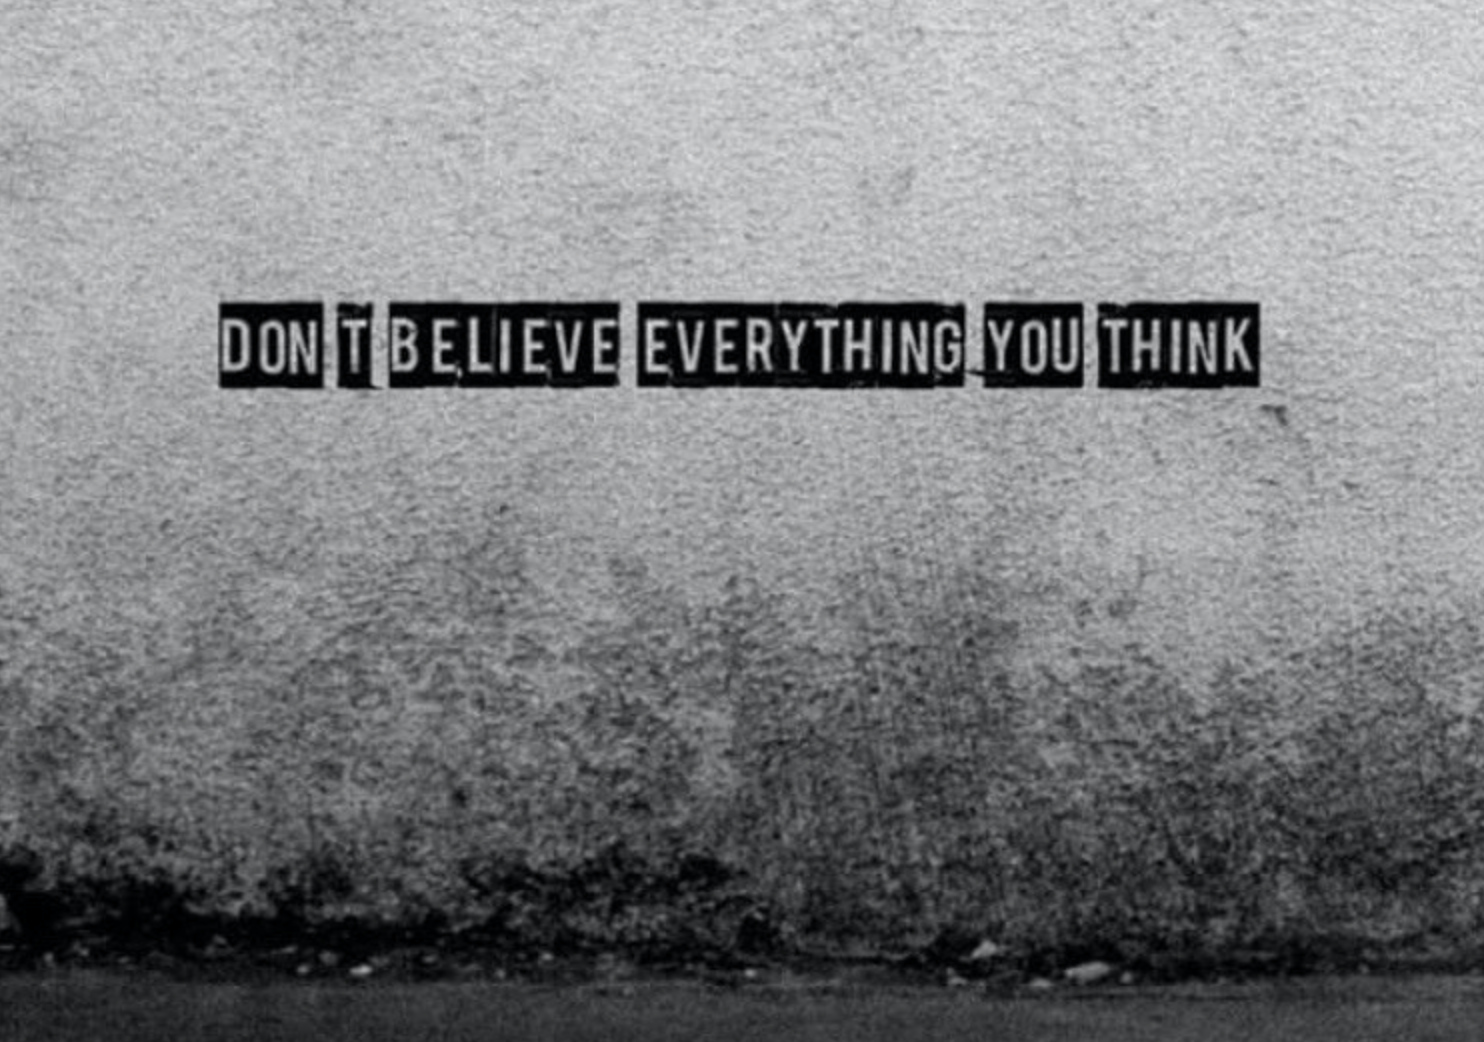 Don't believe everything you think. Don't believe everything you think книга. Believe don't believe. Believe in everything. I believe think that